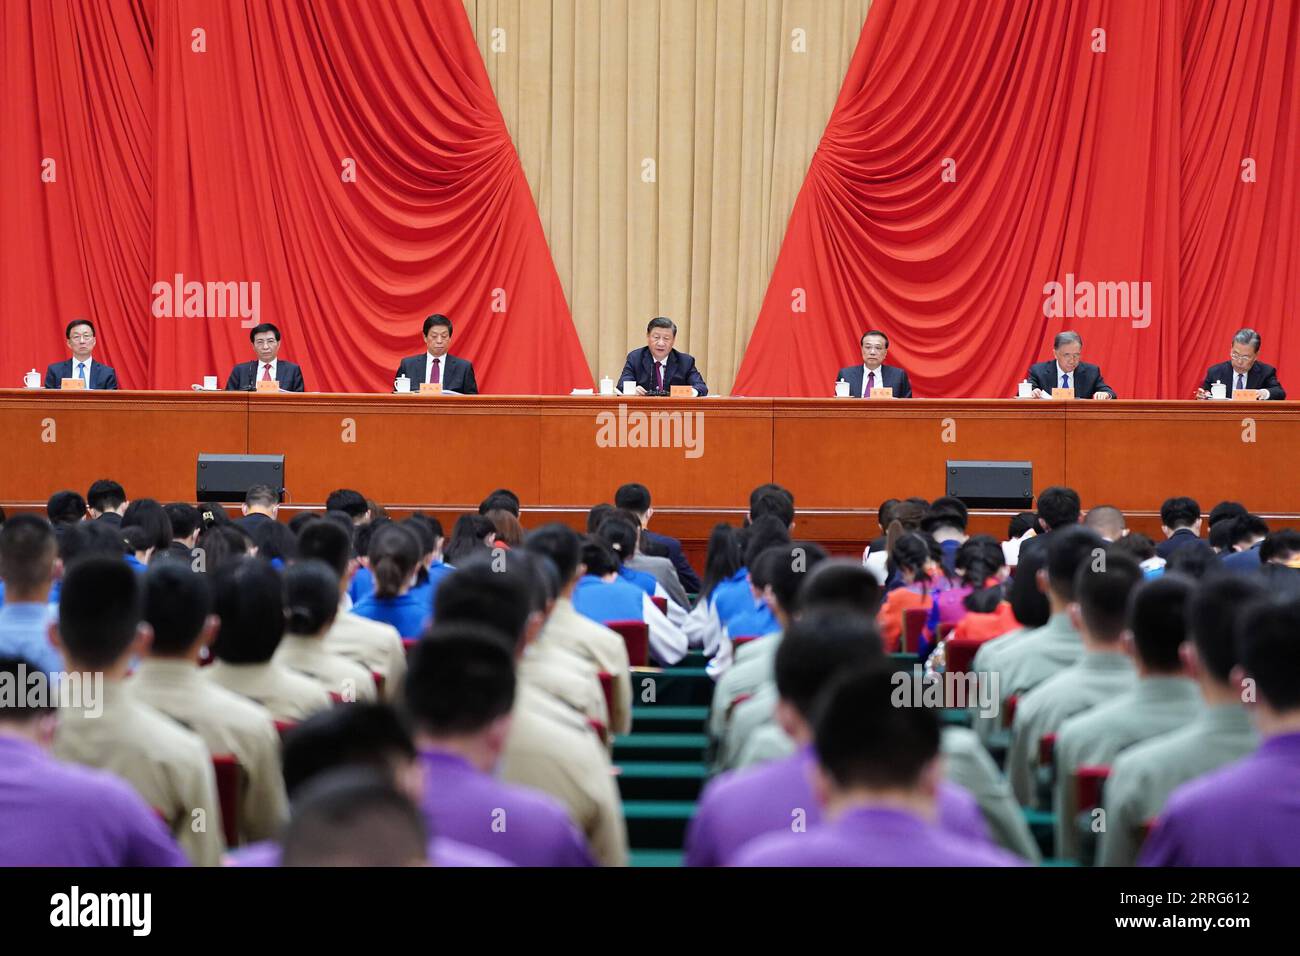 220510 -- BEIJING, May 10, 2022 -- Chinese President Xi Jinping, also general secretary of the Communist Party of China Central Committee and chairman of the Central Military Commission, delivers a speech at a ceremony marking the 100th anniversary of the founding of the Communist Youth League of China CYLC at the Great Hall of the People in Beijing, capital of China, May 10, 2022.  CHINA-BEIJING-CYLC-100TH ANNIVERSARY-CEREMONY CN YanxYan PUBLICATIONxNOTxINxCHN Stock Photo